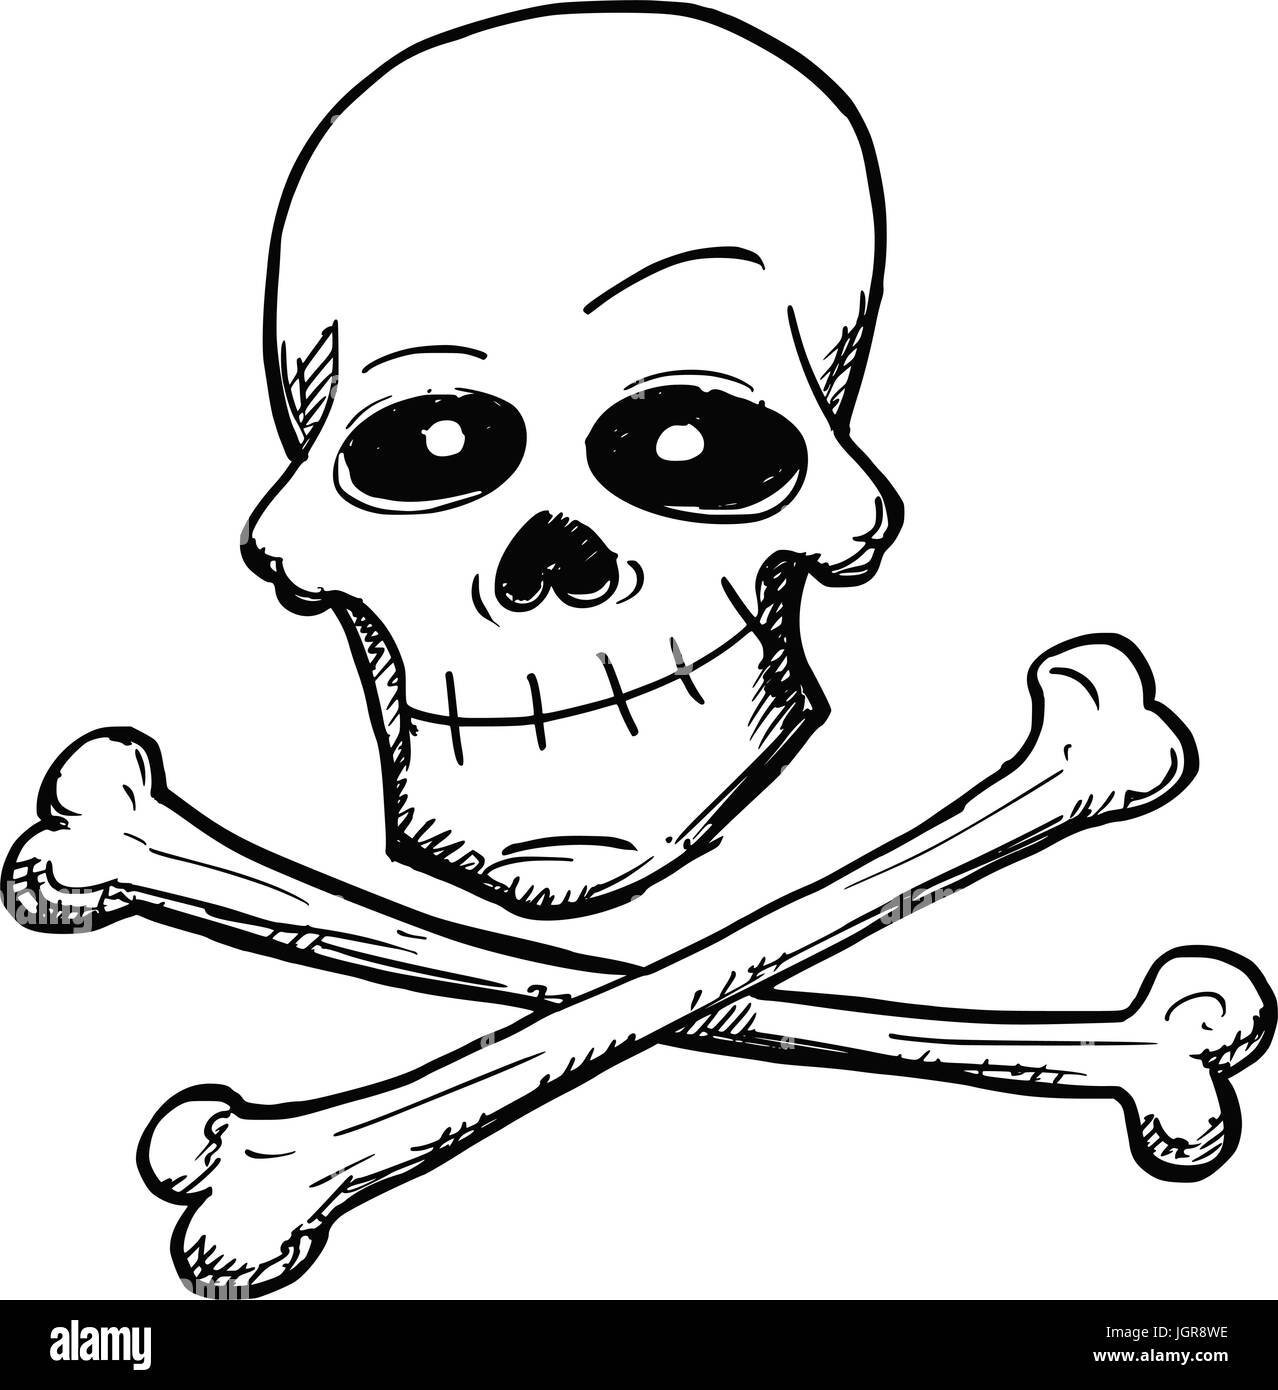 Vector cartoon of danger poison or pirate sign of human skull and two bones crossed Stock Vector